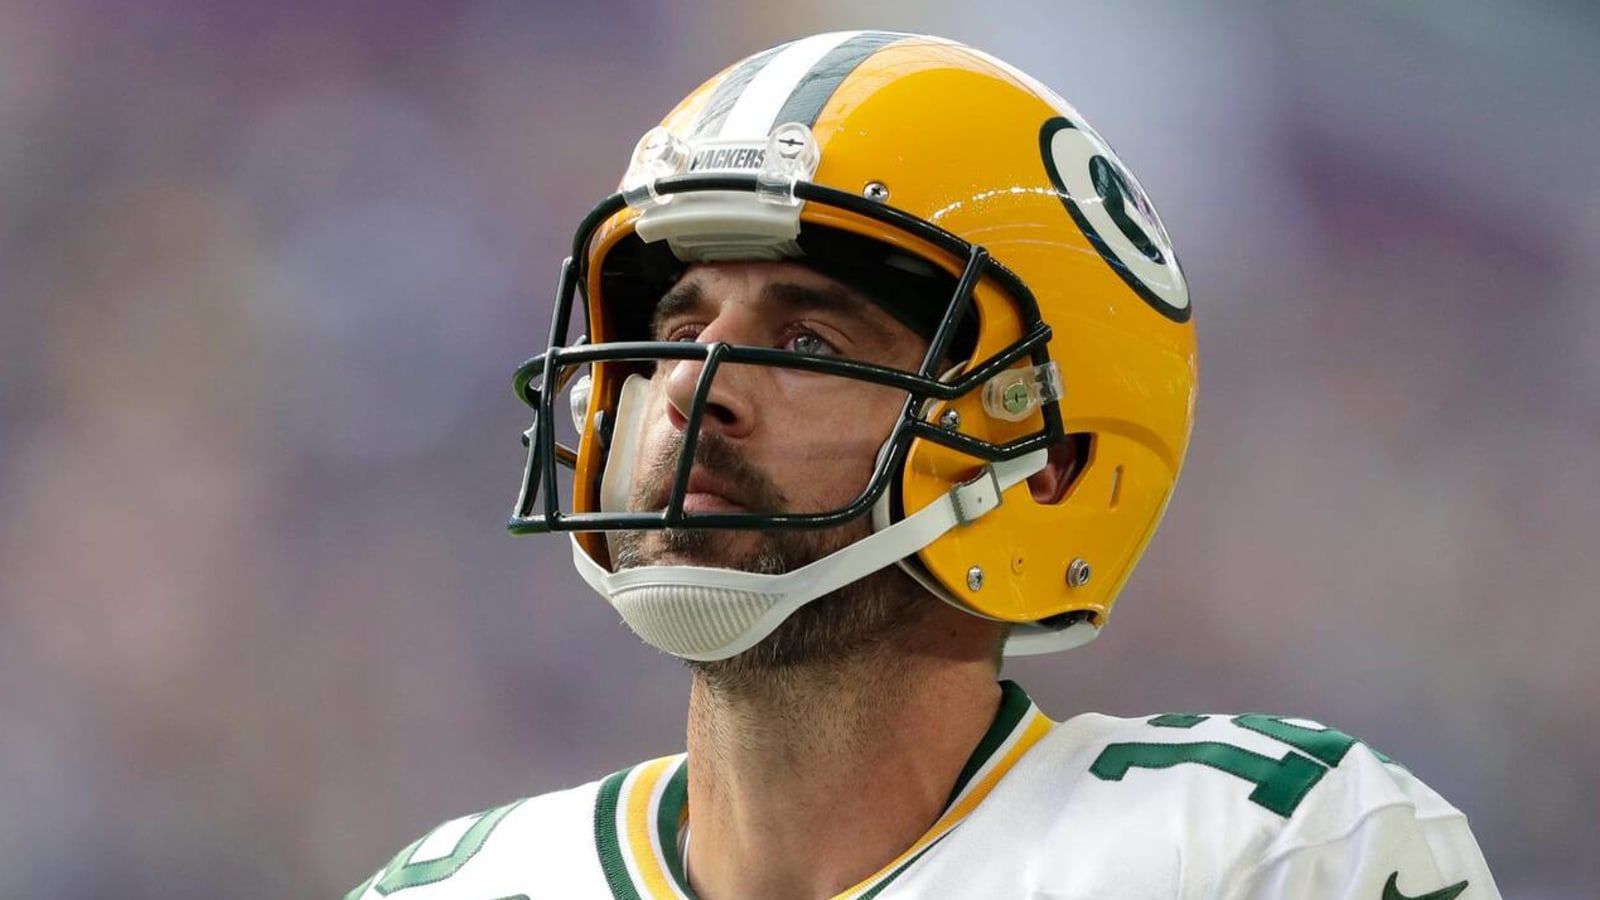 Rodgers may be turning to healing crystals to manifest trade